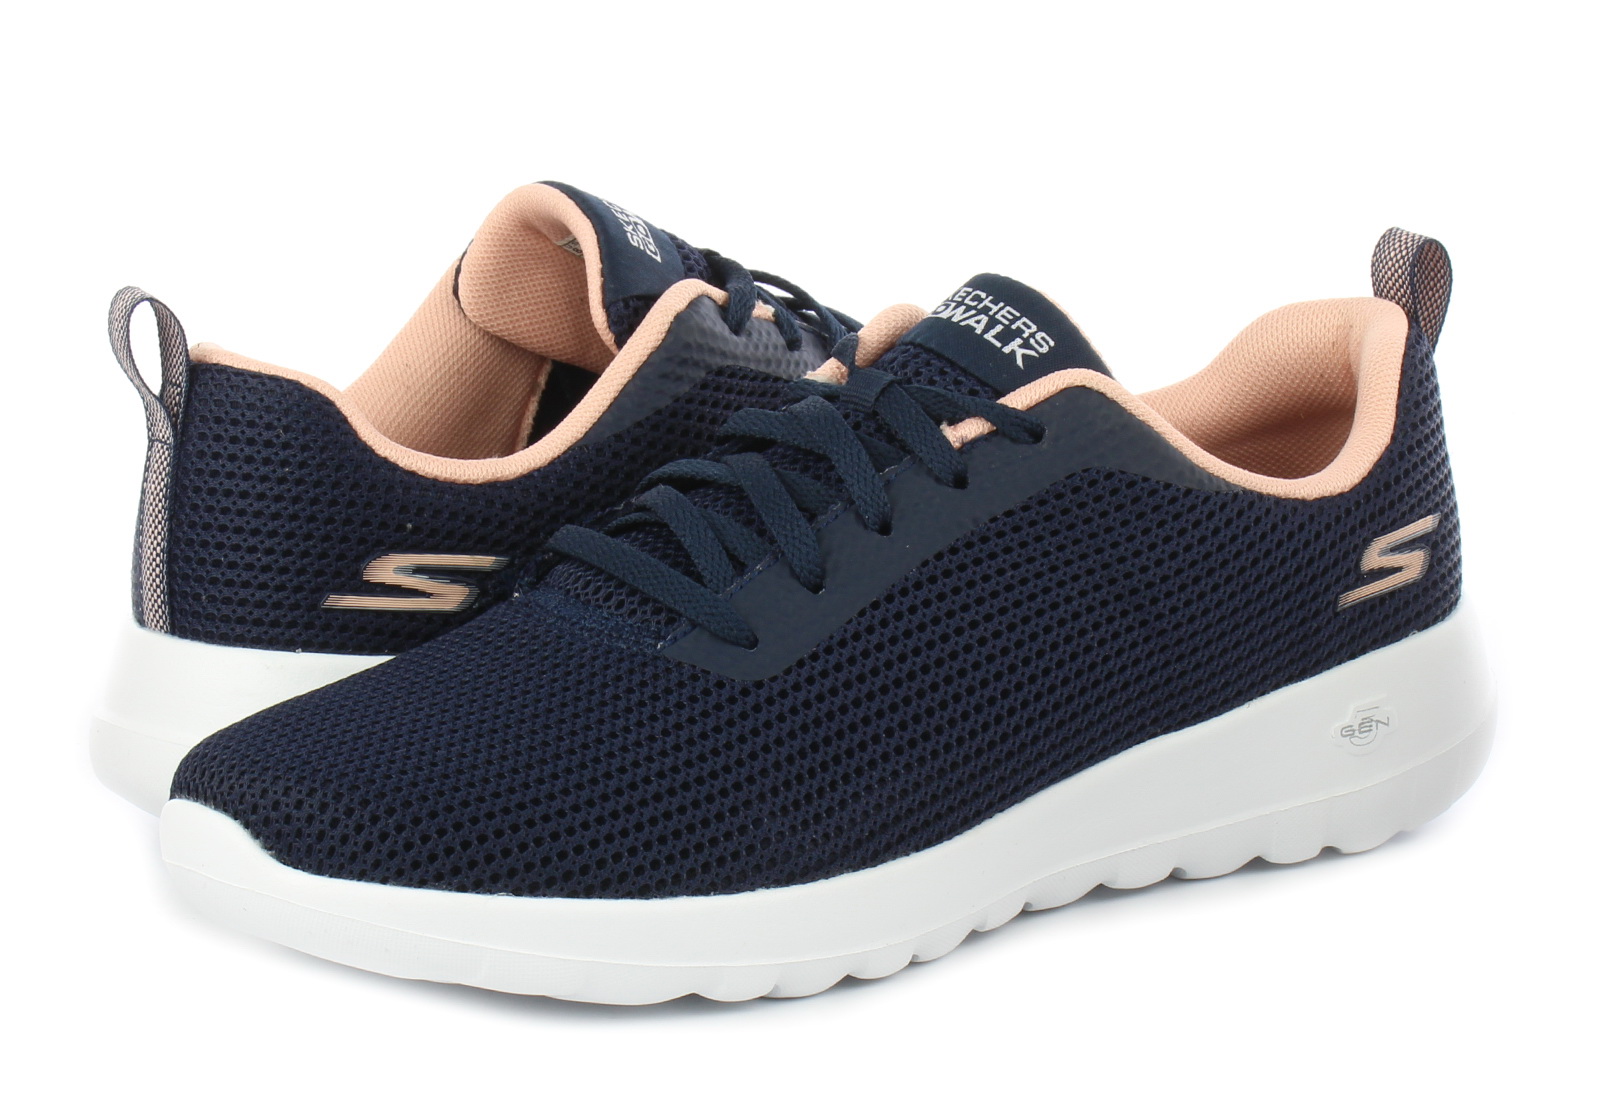 equivocado Ceder Personal Skechers Sneakers - Go Walk Joy - 15641-NVPK - Online shop for sneakers,  shoes and boots